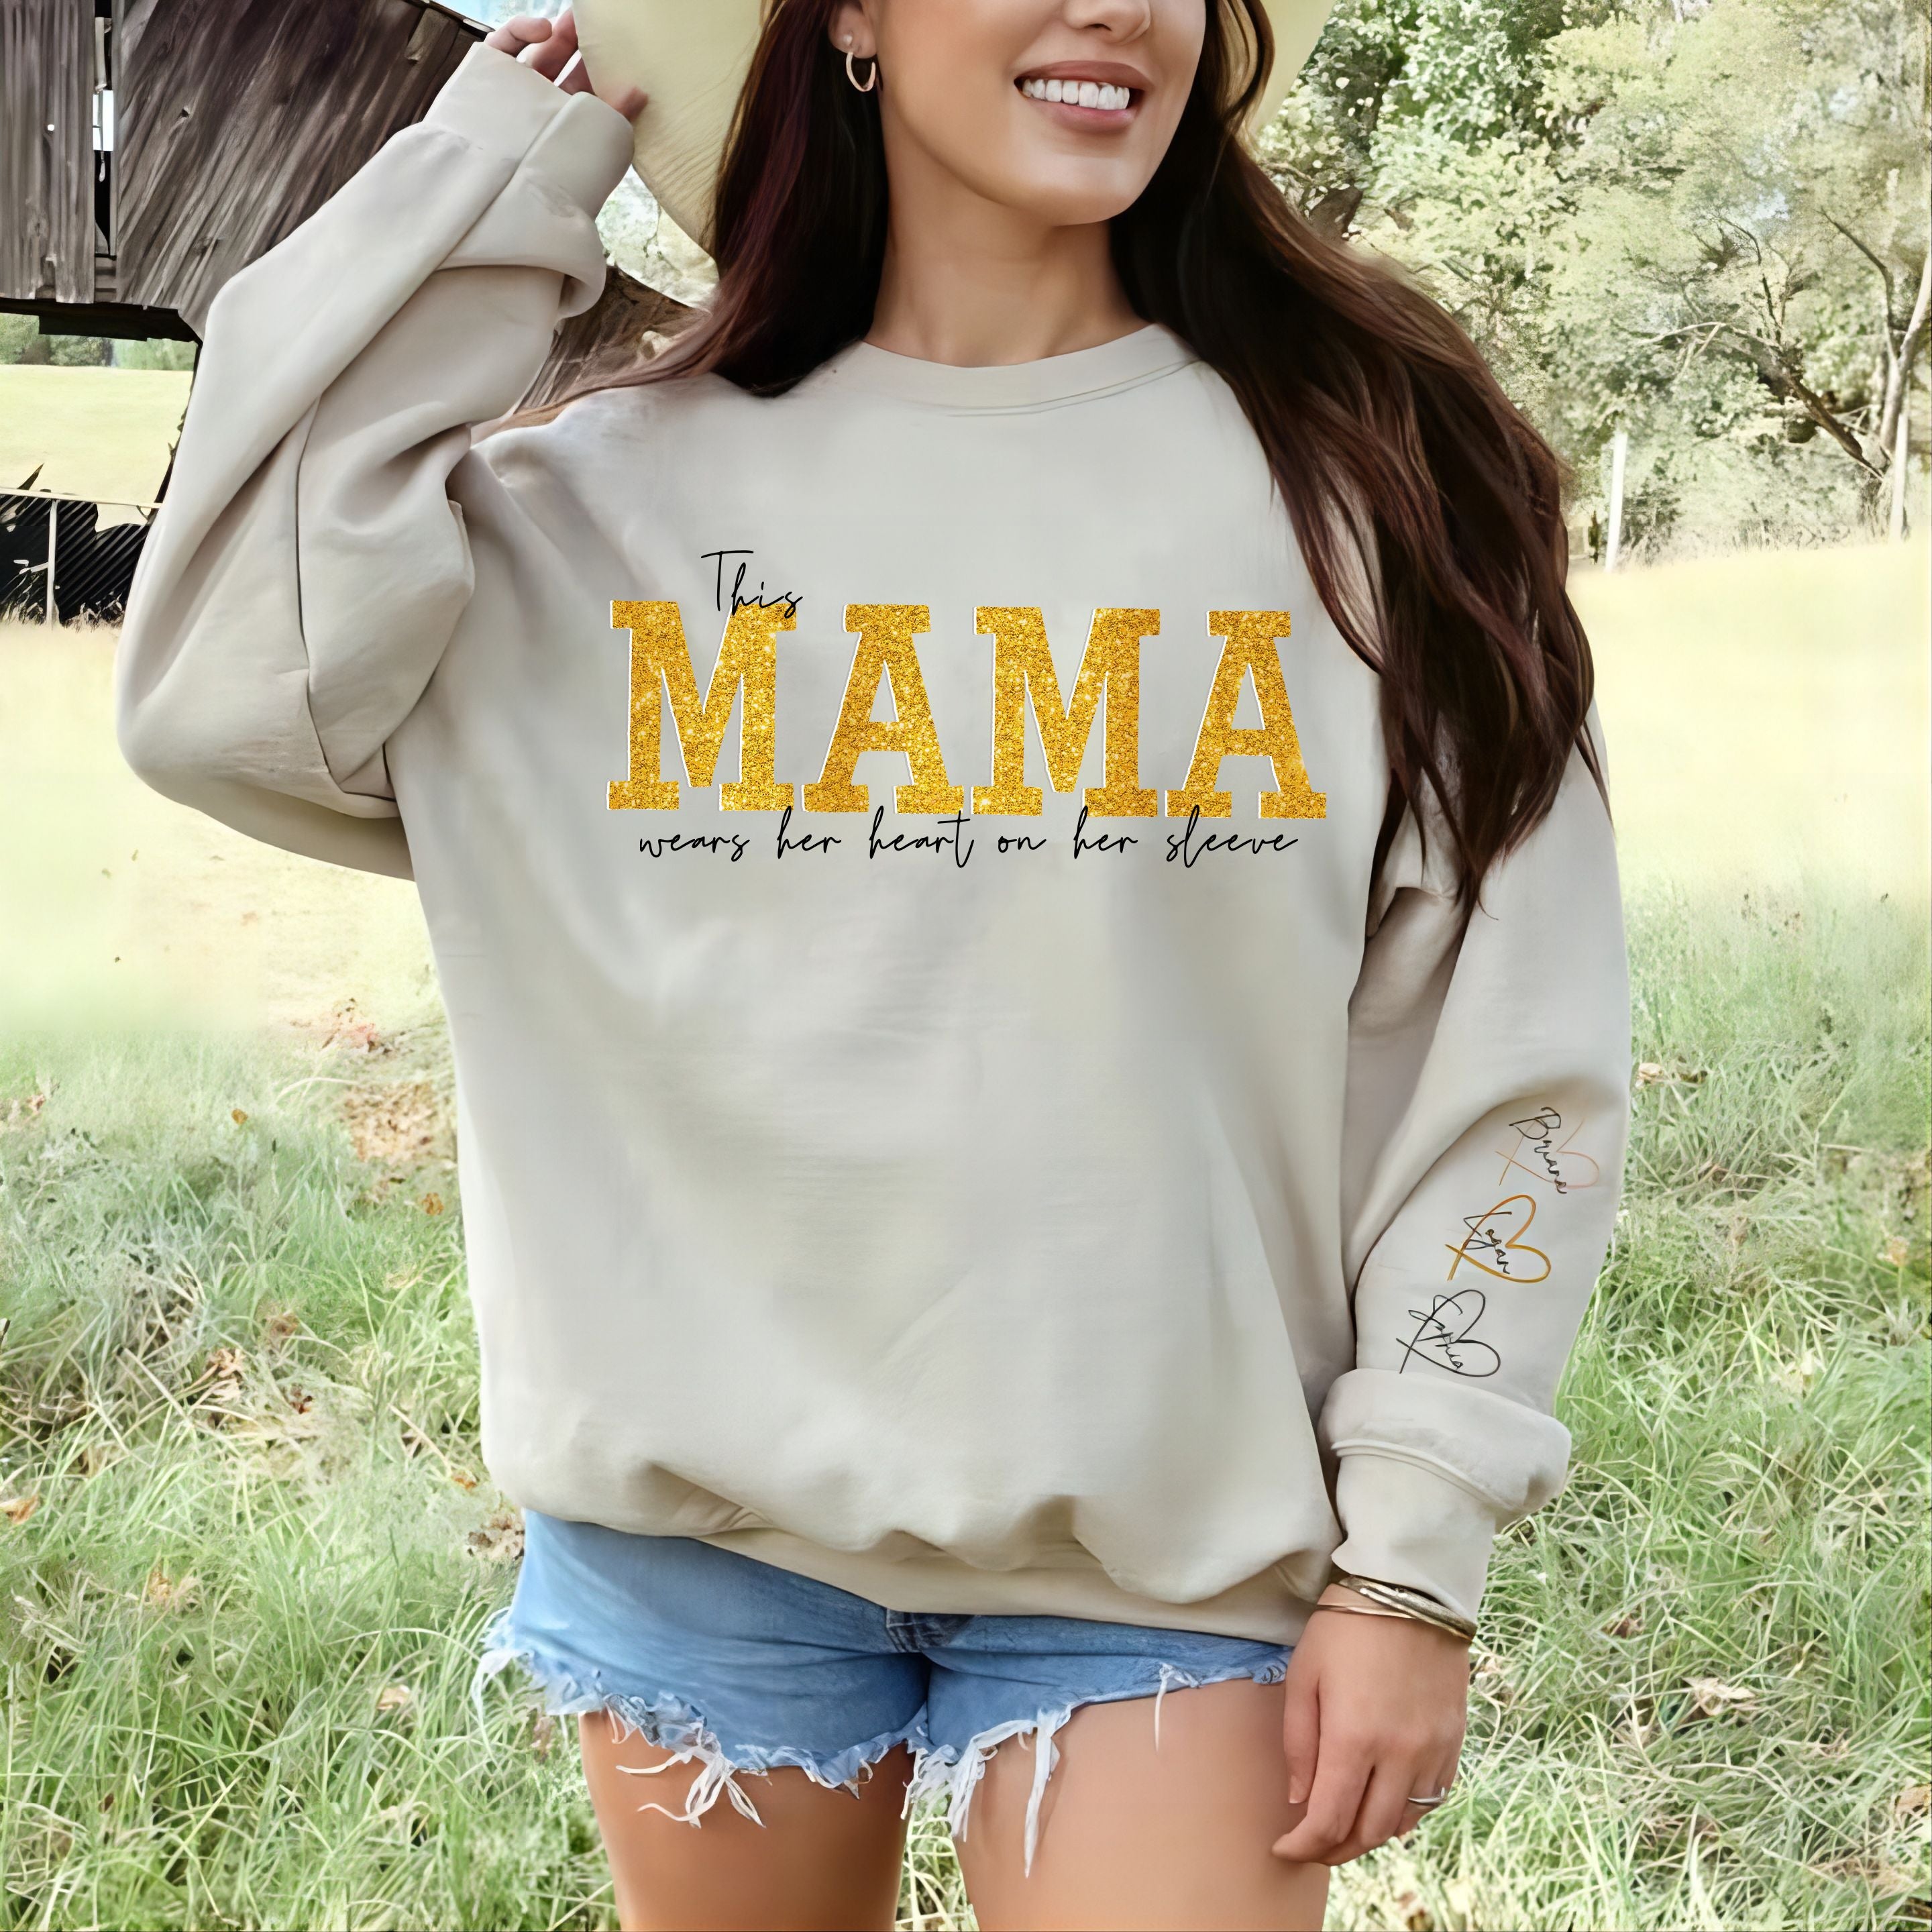 Personalized Wear Heart On Sleeve Mama Sweatshirt with Kid Names on Sleeves Mother's Day Birthday Gift (Customized free)